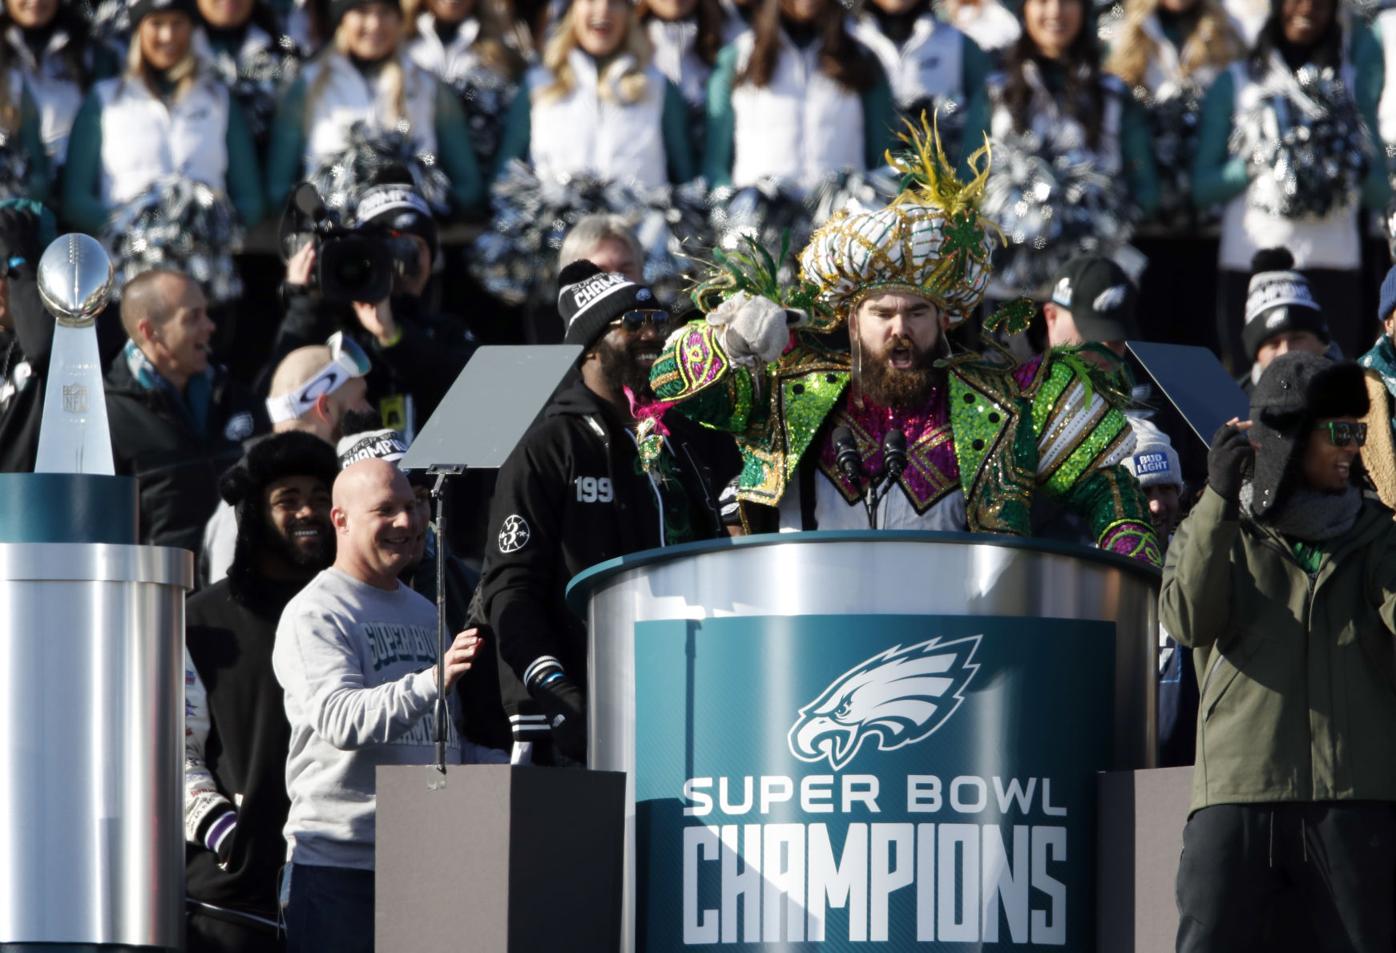 Chris Long and Jason Kelce have the best outfits for the Eagles